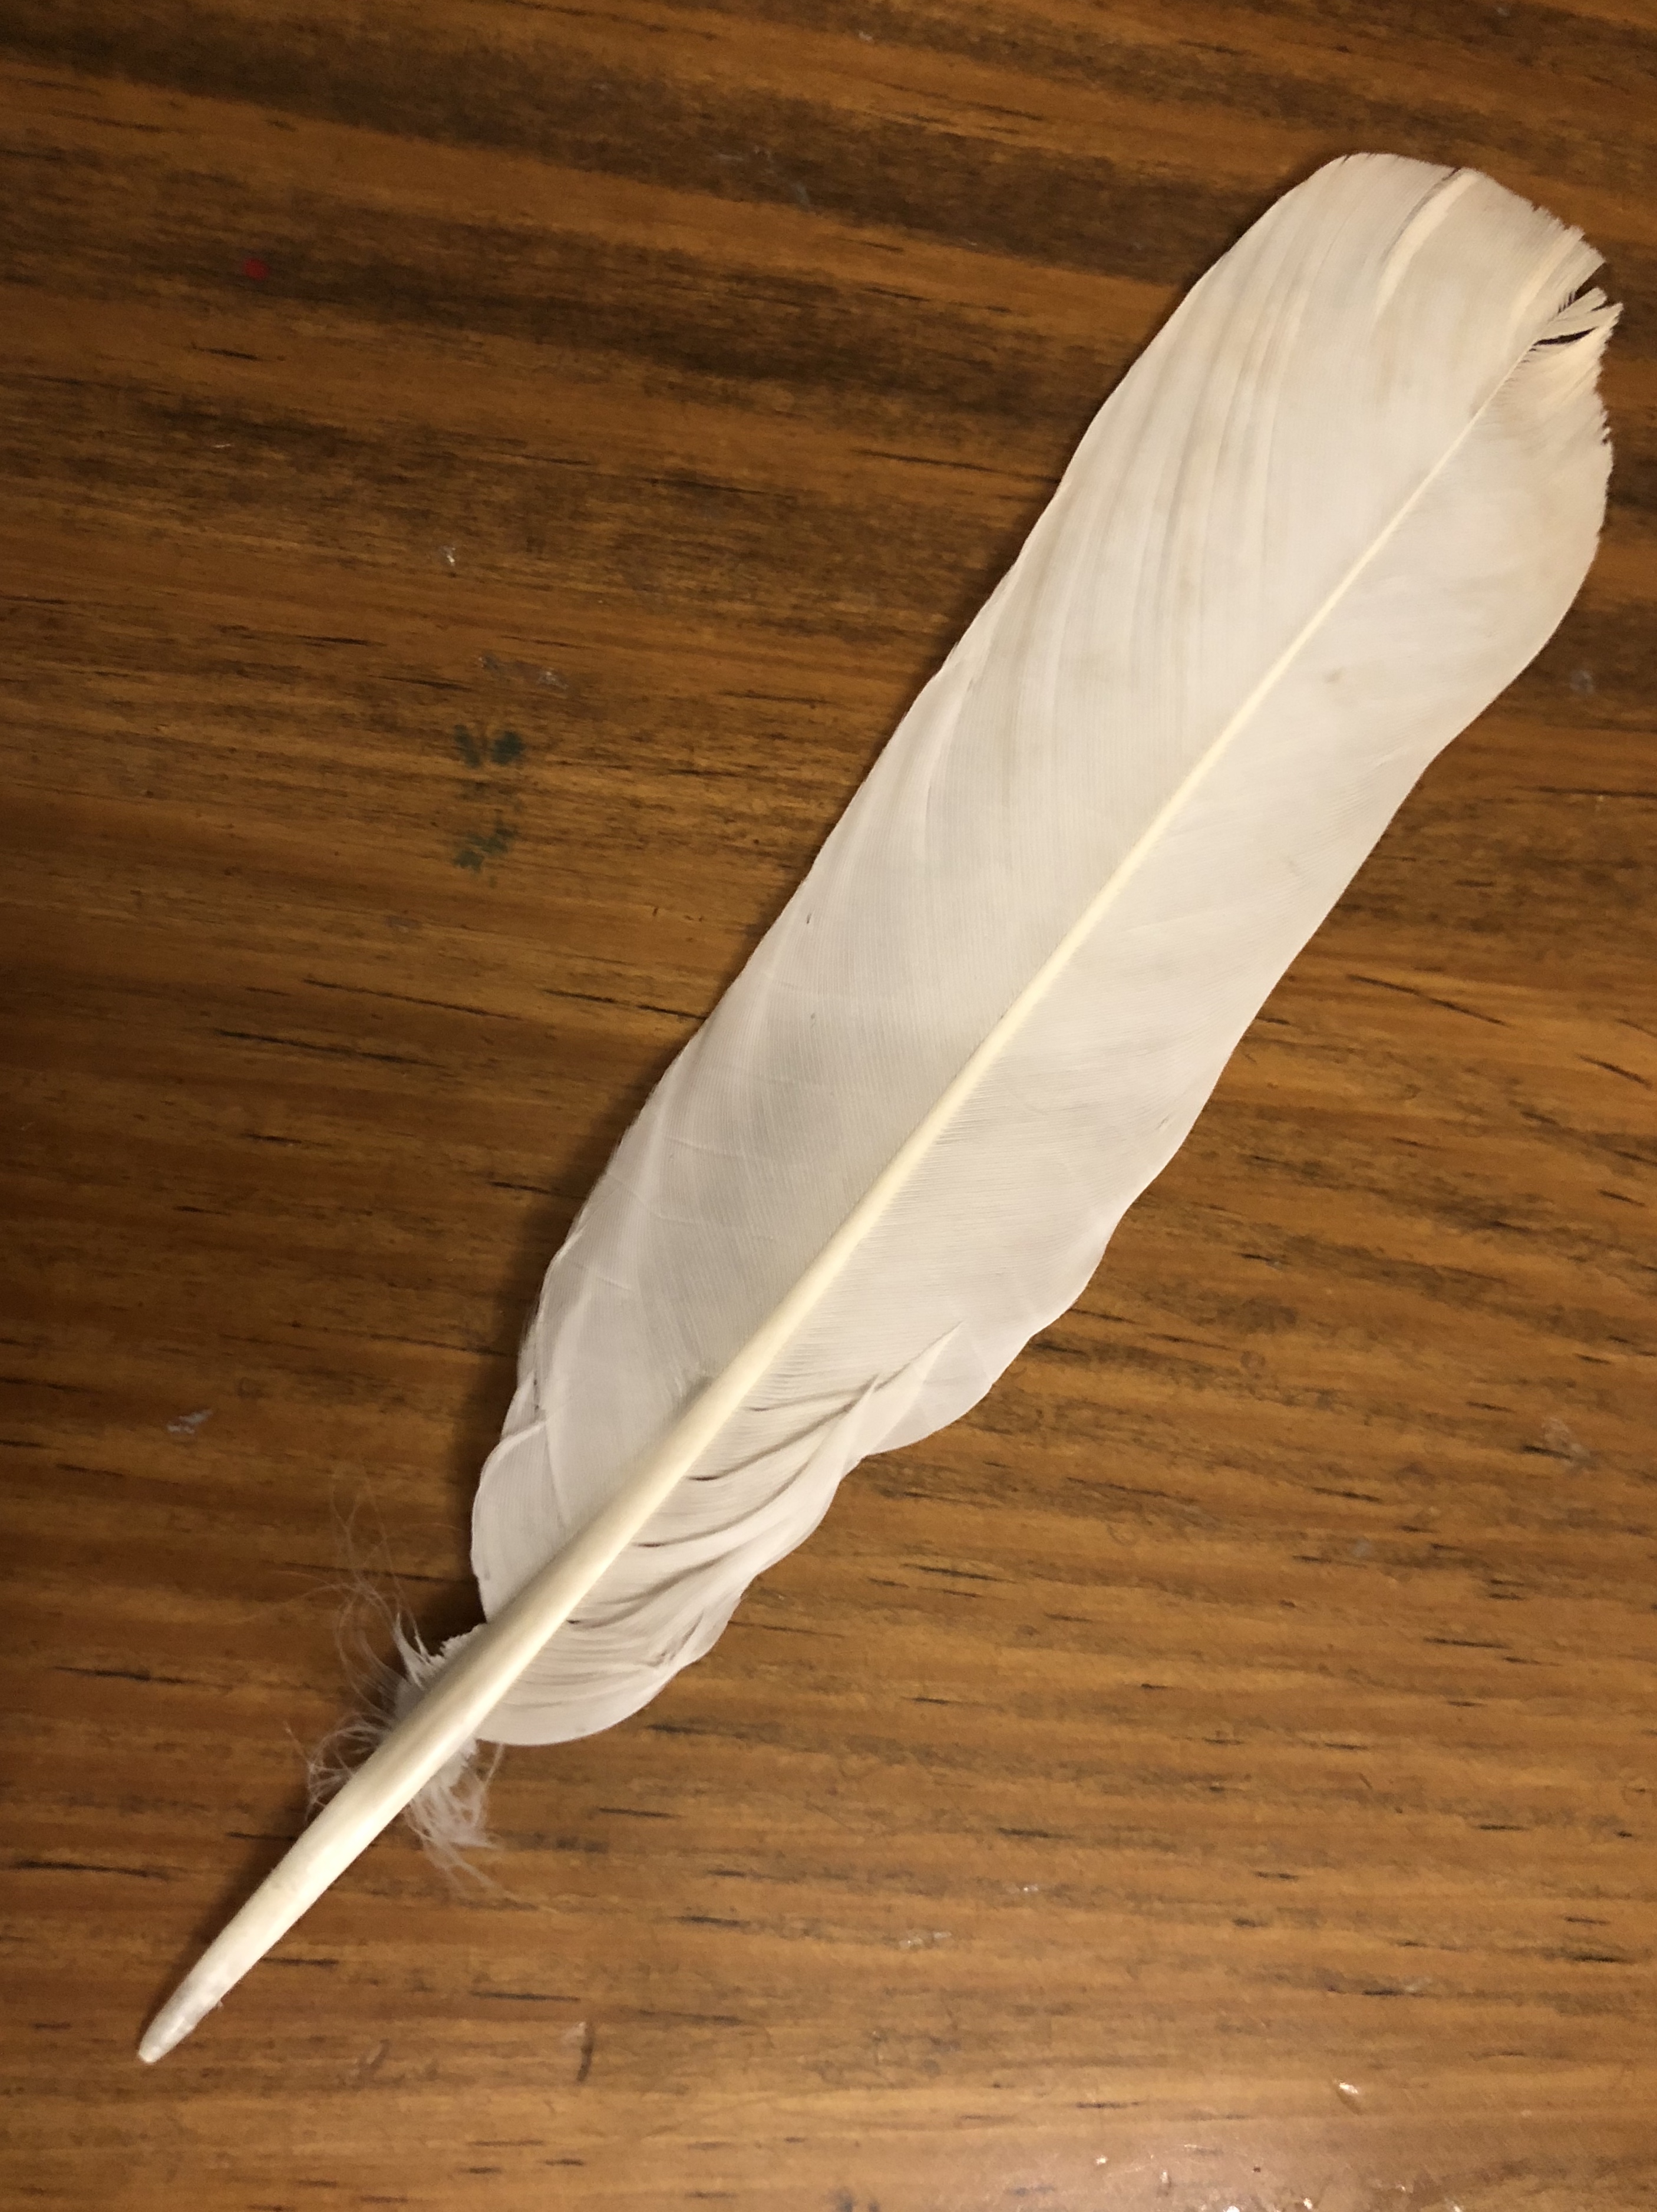 Feathers of Protection: Reflections from Israel